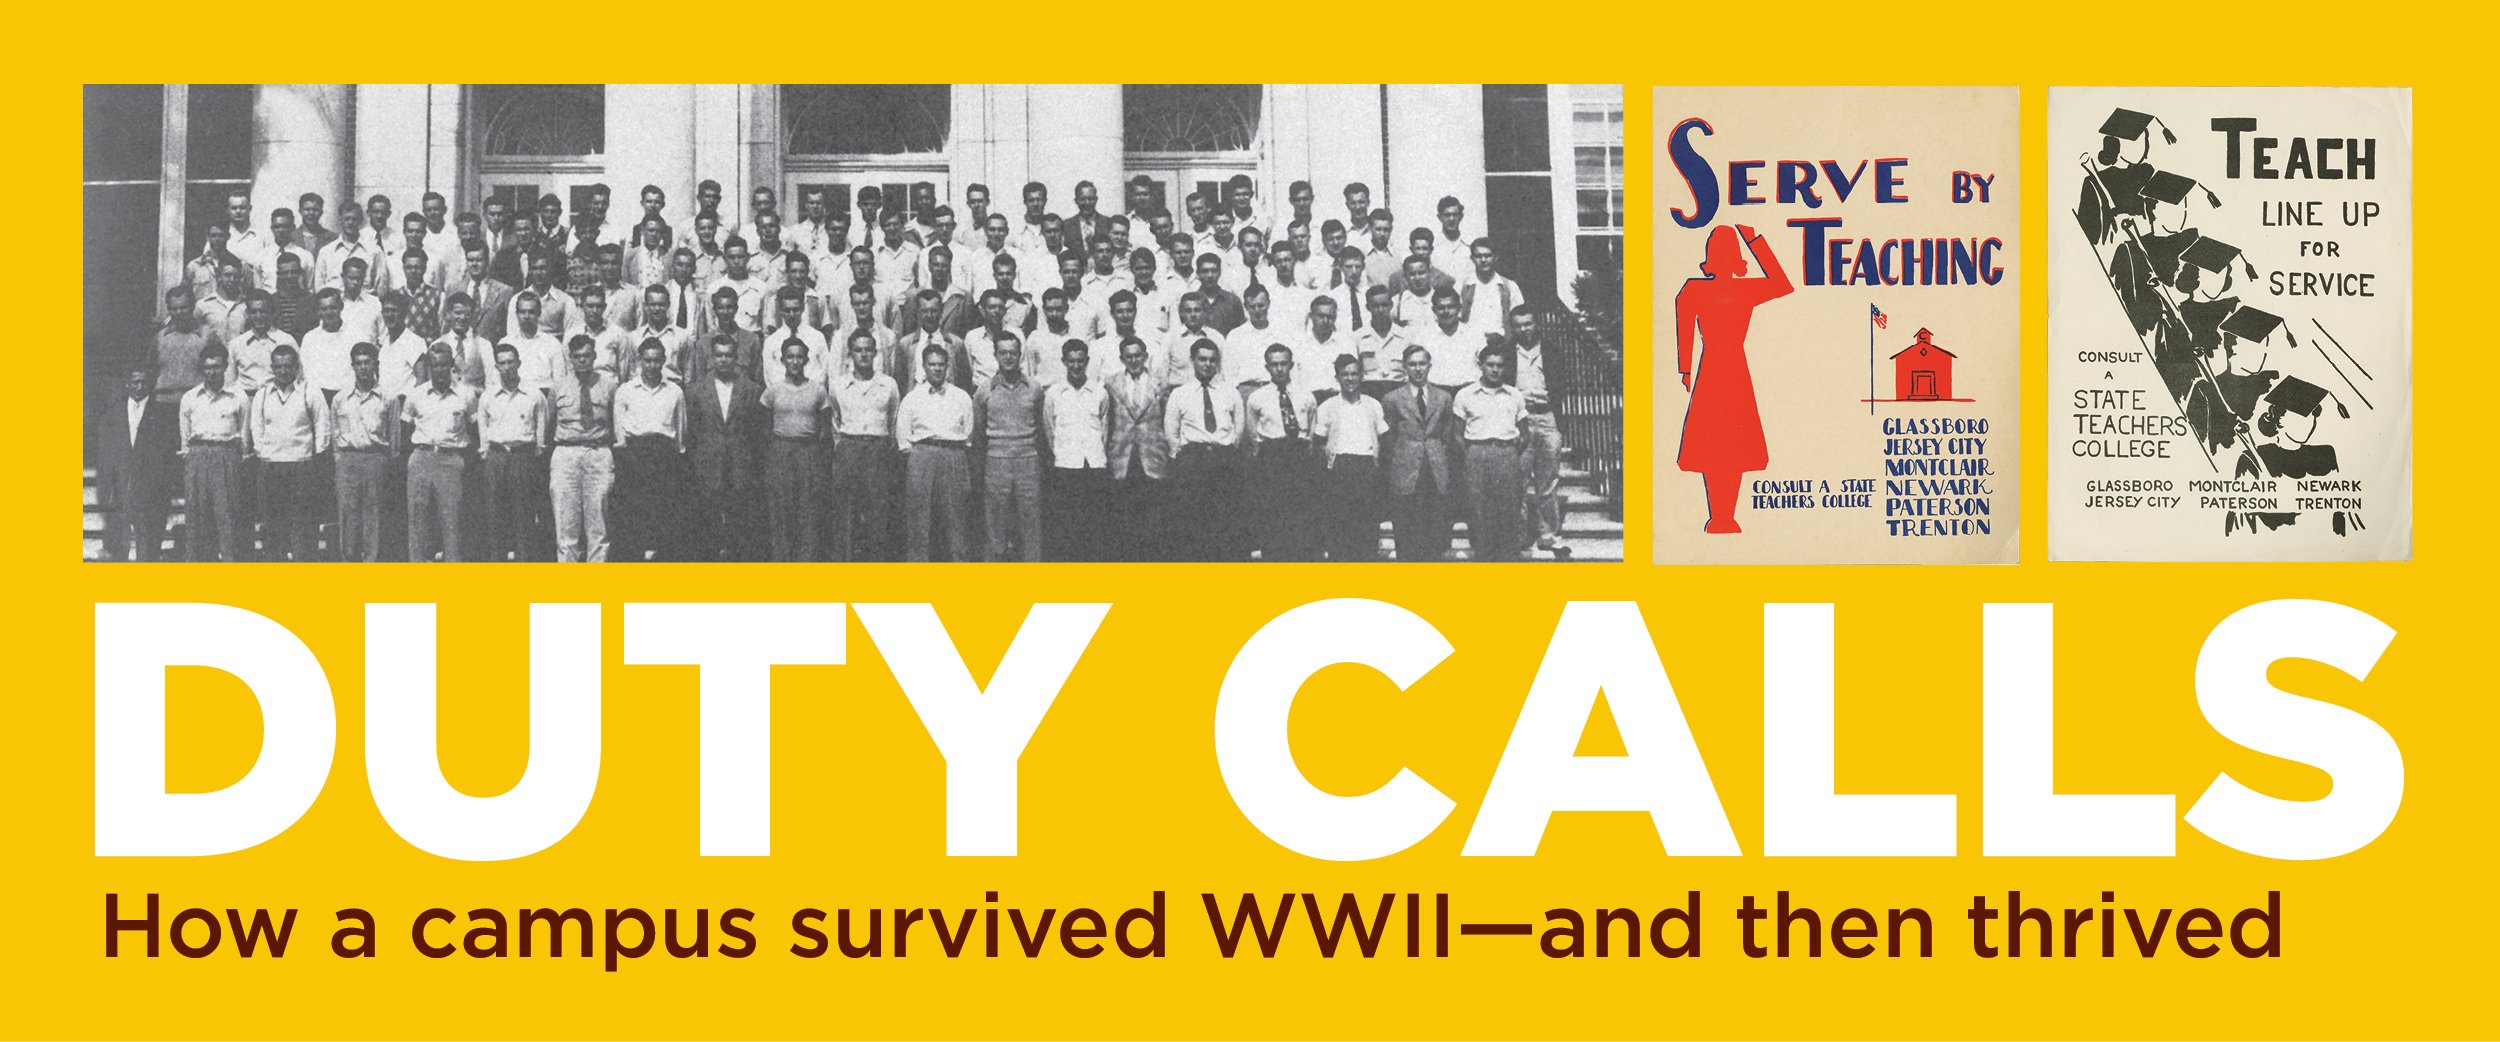 Duty calls: How a campus survived WWII—and then thrived